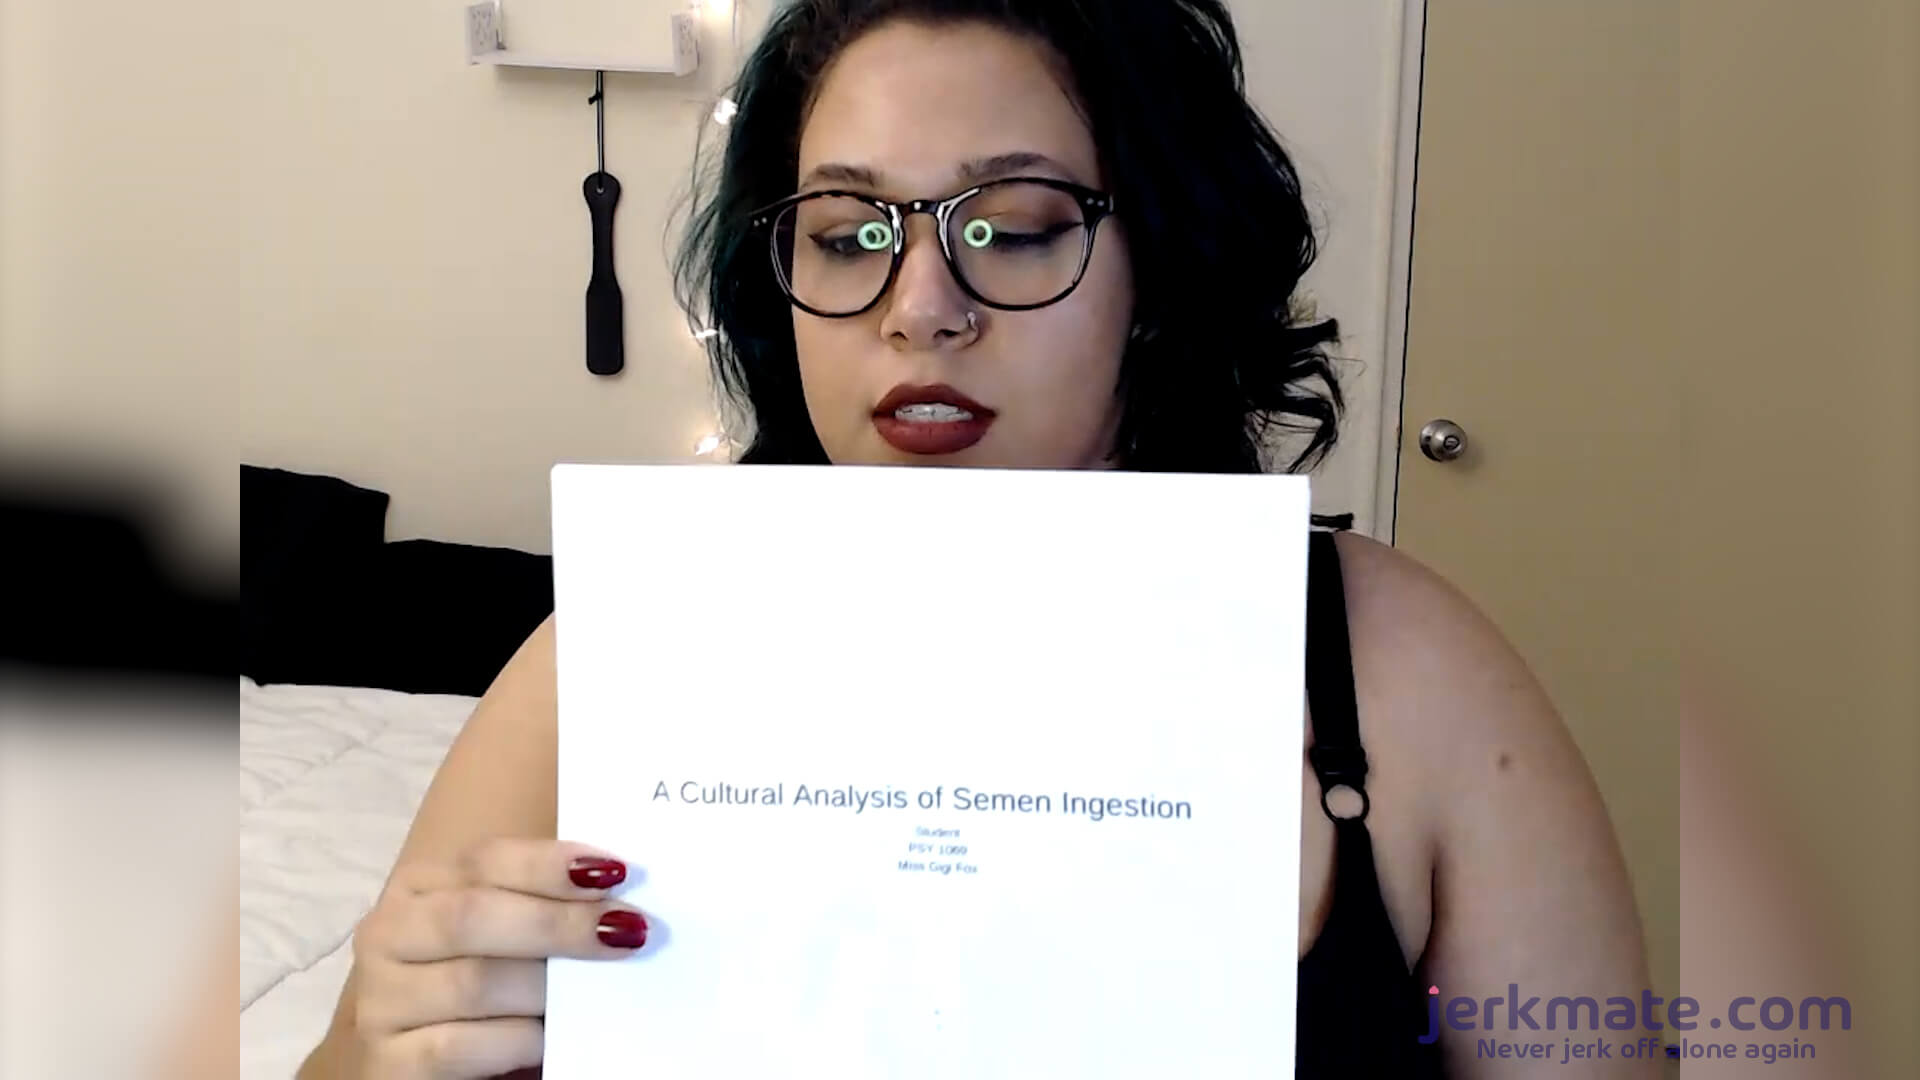 BBW camgirl SuccubusMissGigiFox wants to play with you. If you're into roleplay, JOI, and many other fetishes, she'll make your time the best you've had in years.